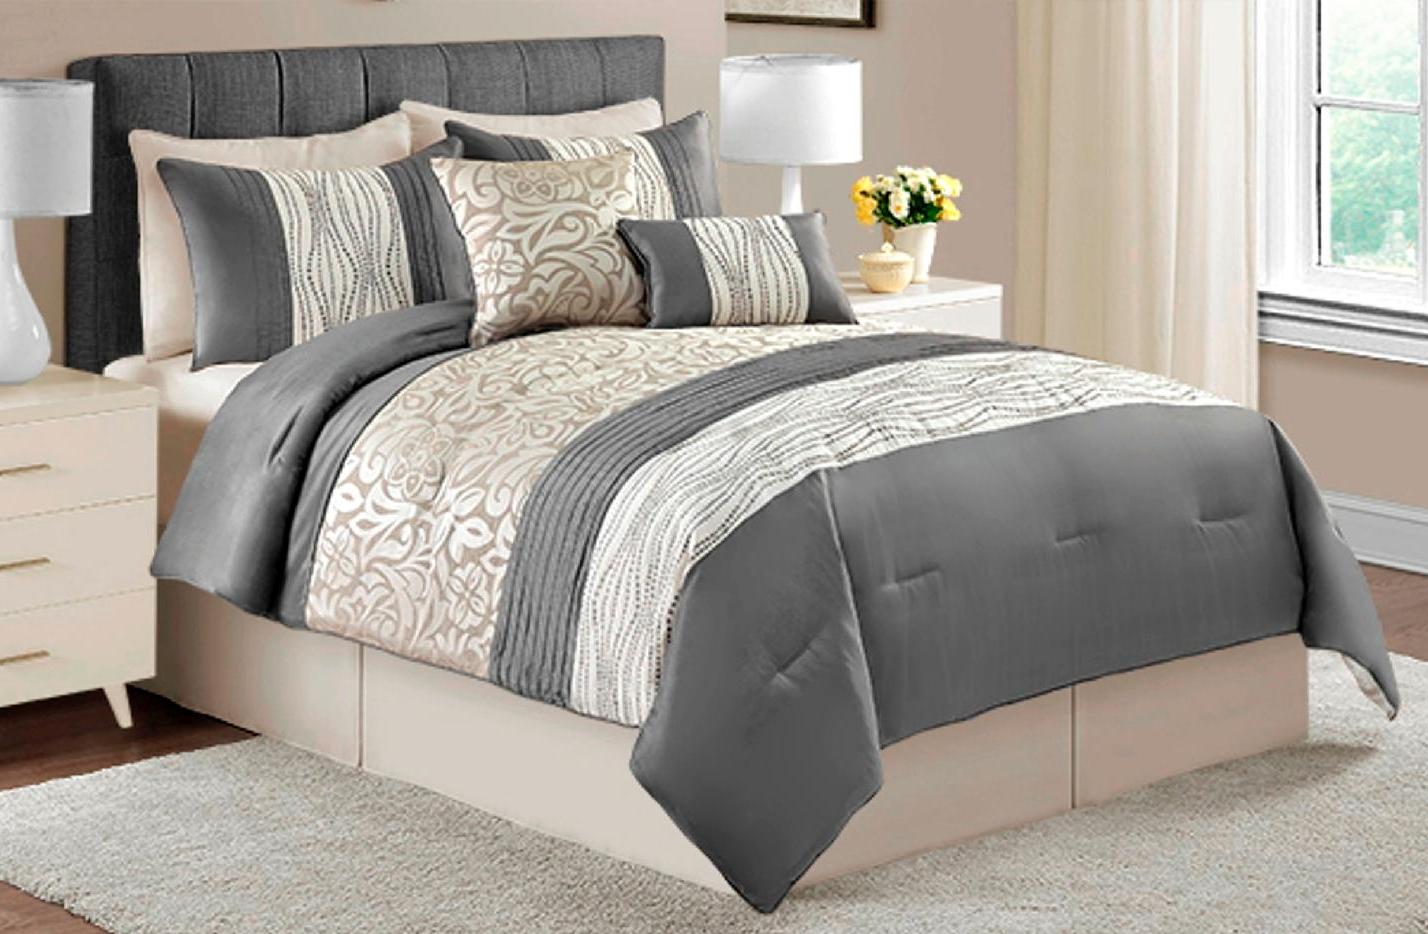 The Great Find 8-Piece Arcadia Comforter Set